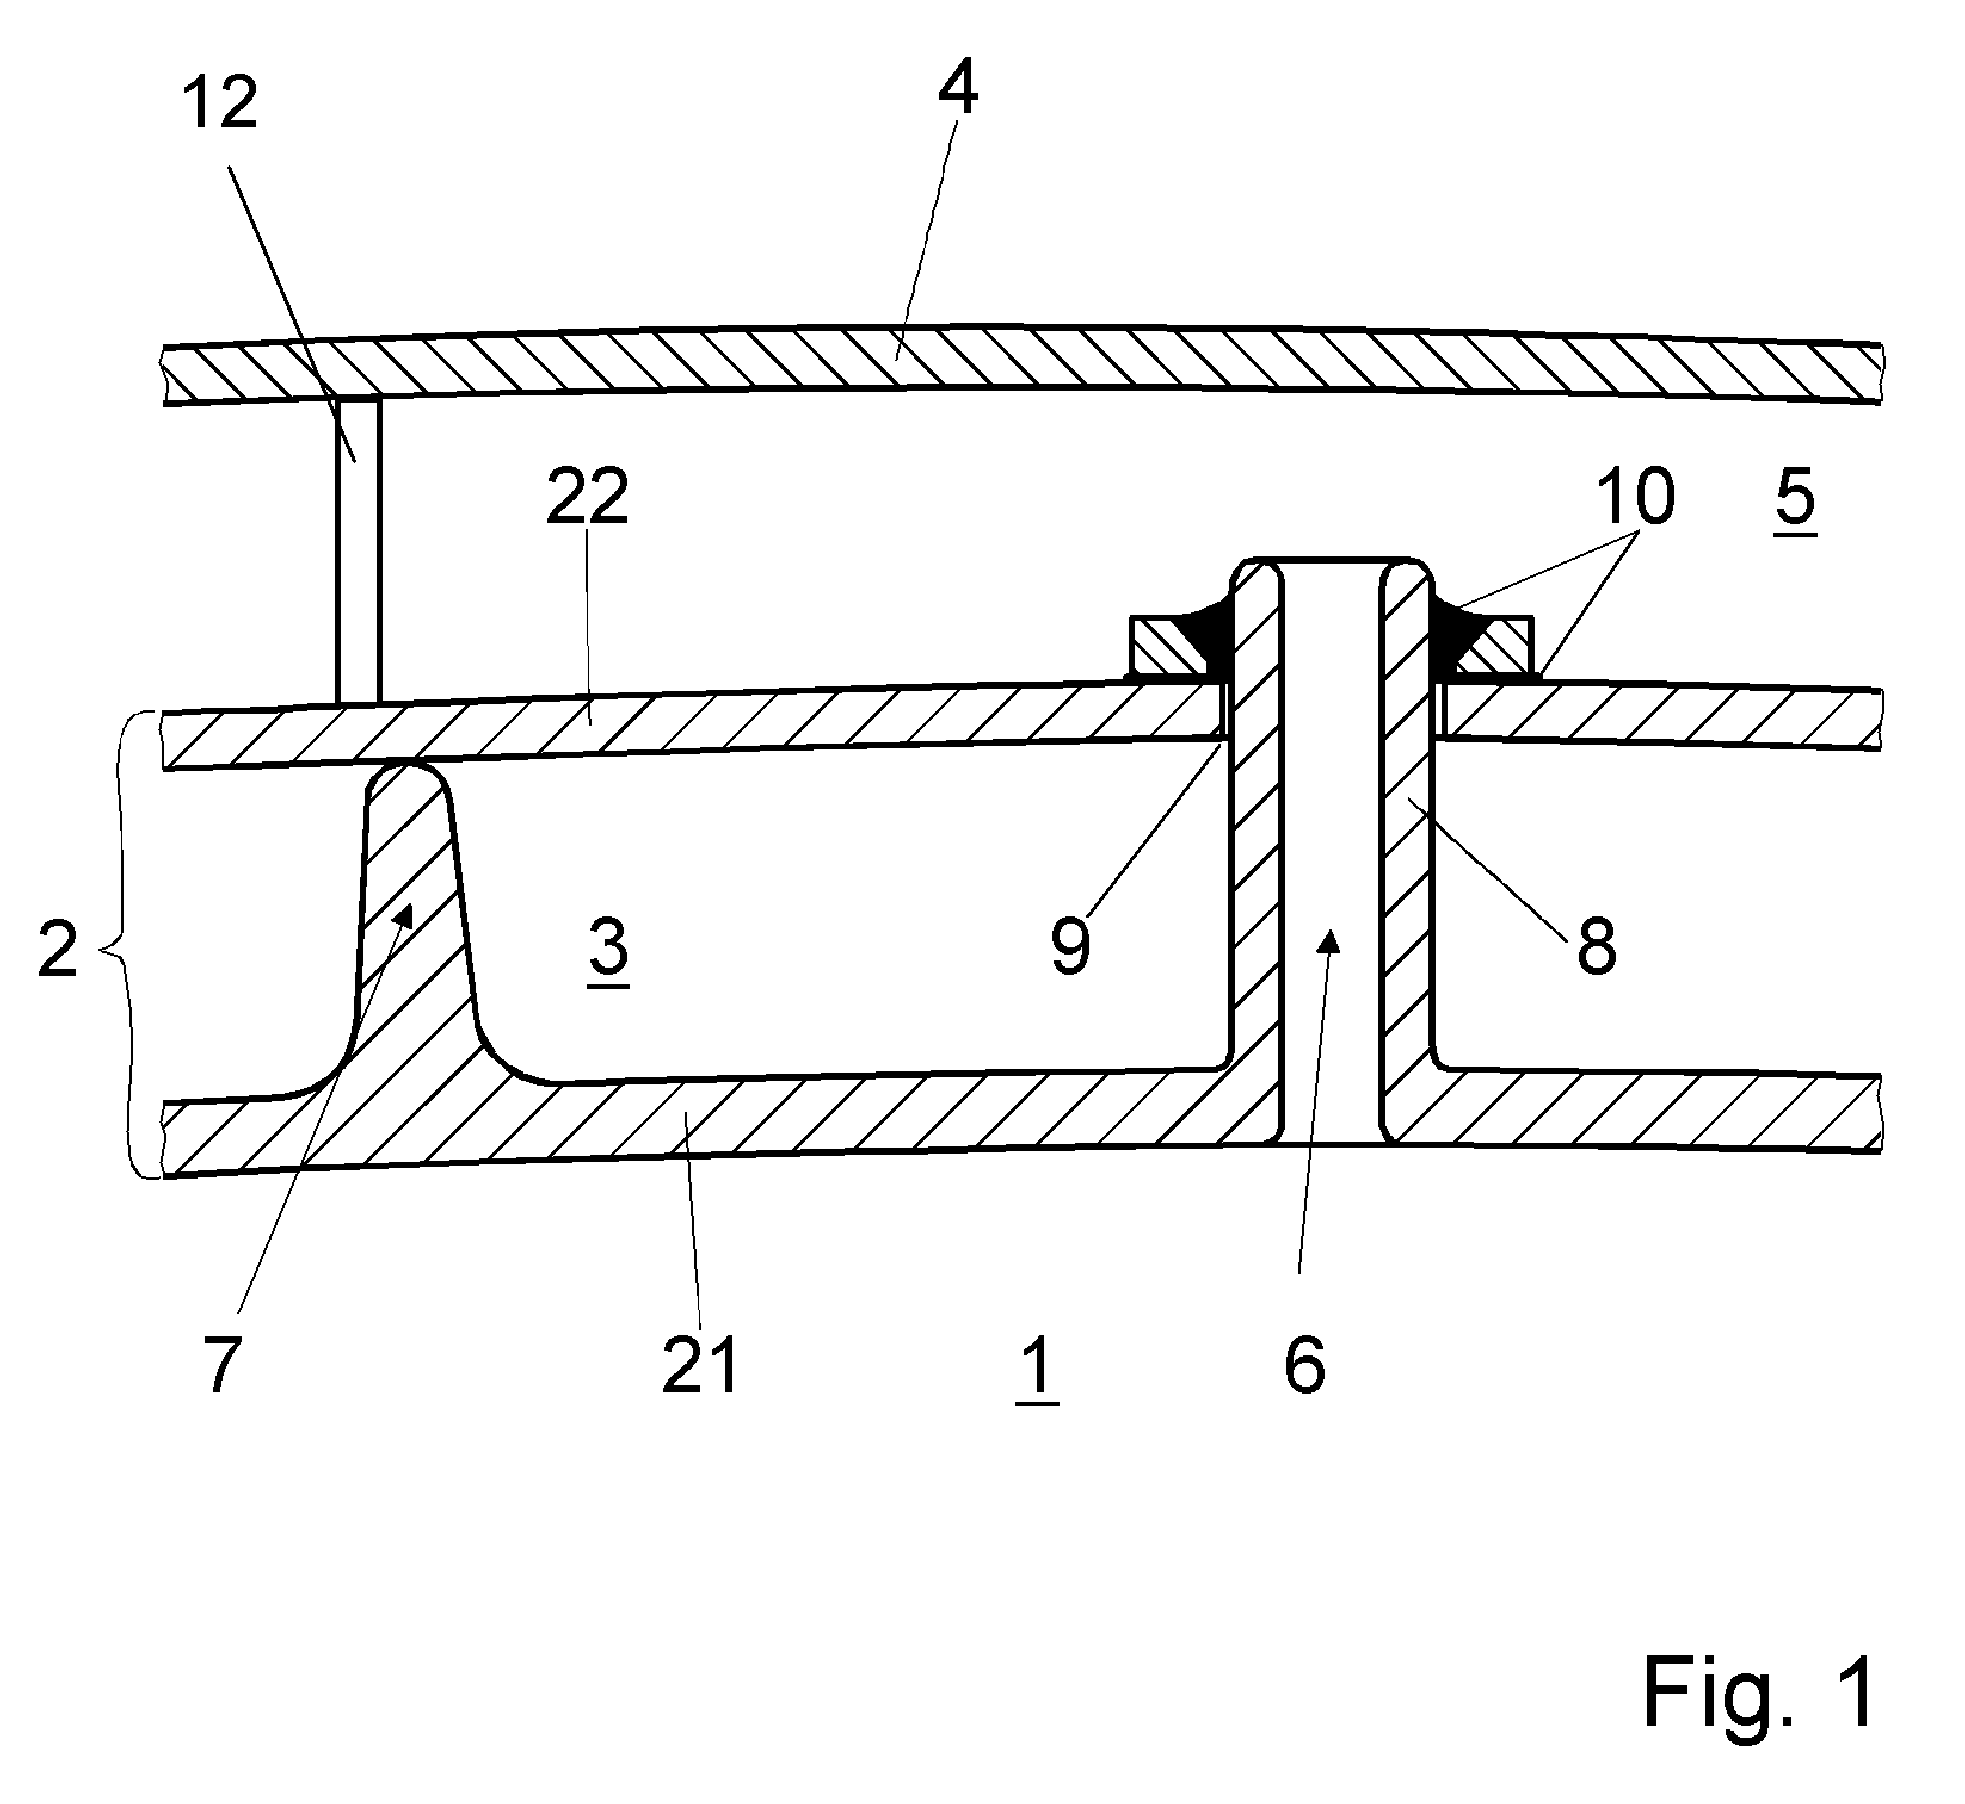 Damping arrangement for reducing combustion-chamber pulsation in a gas turbine system